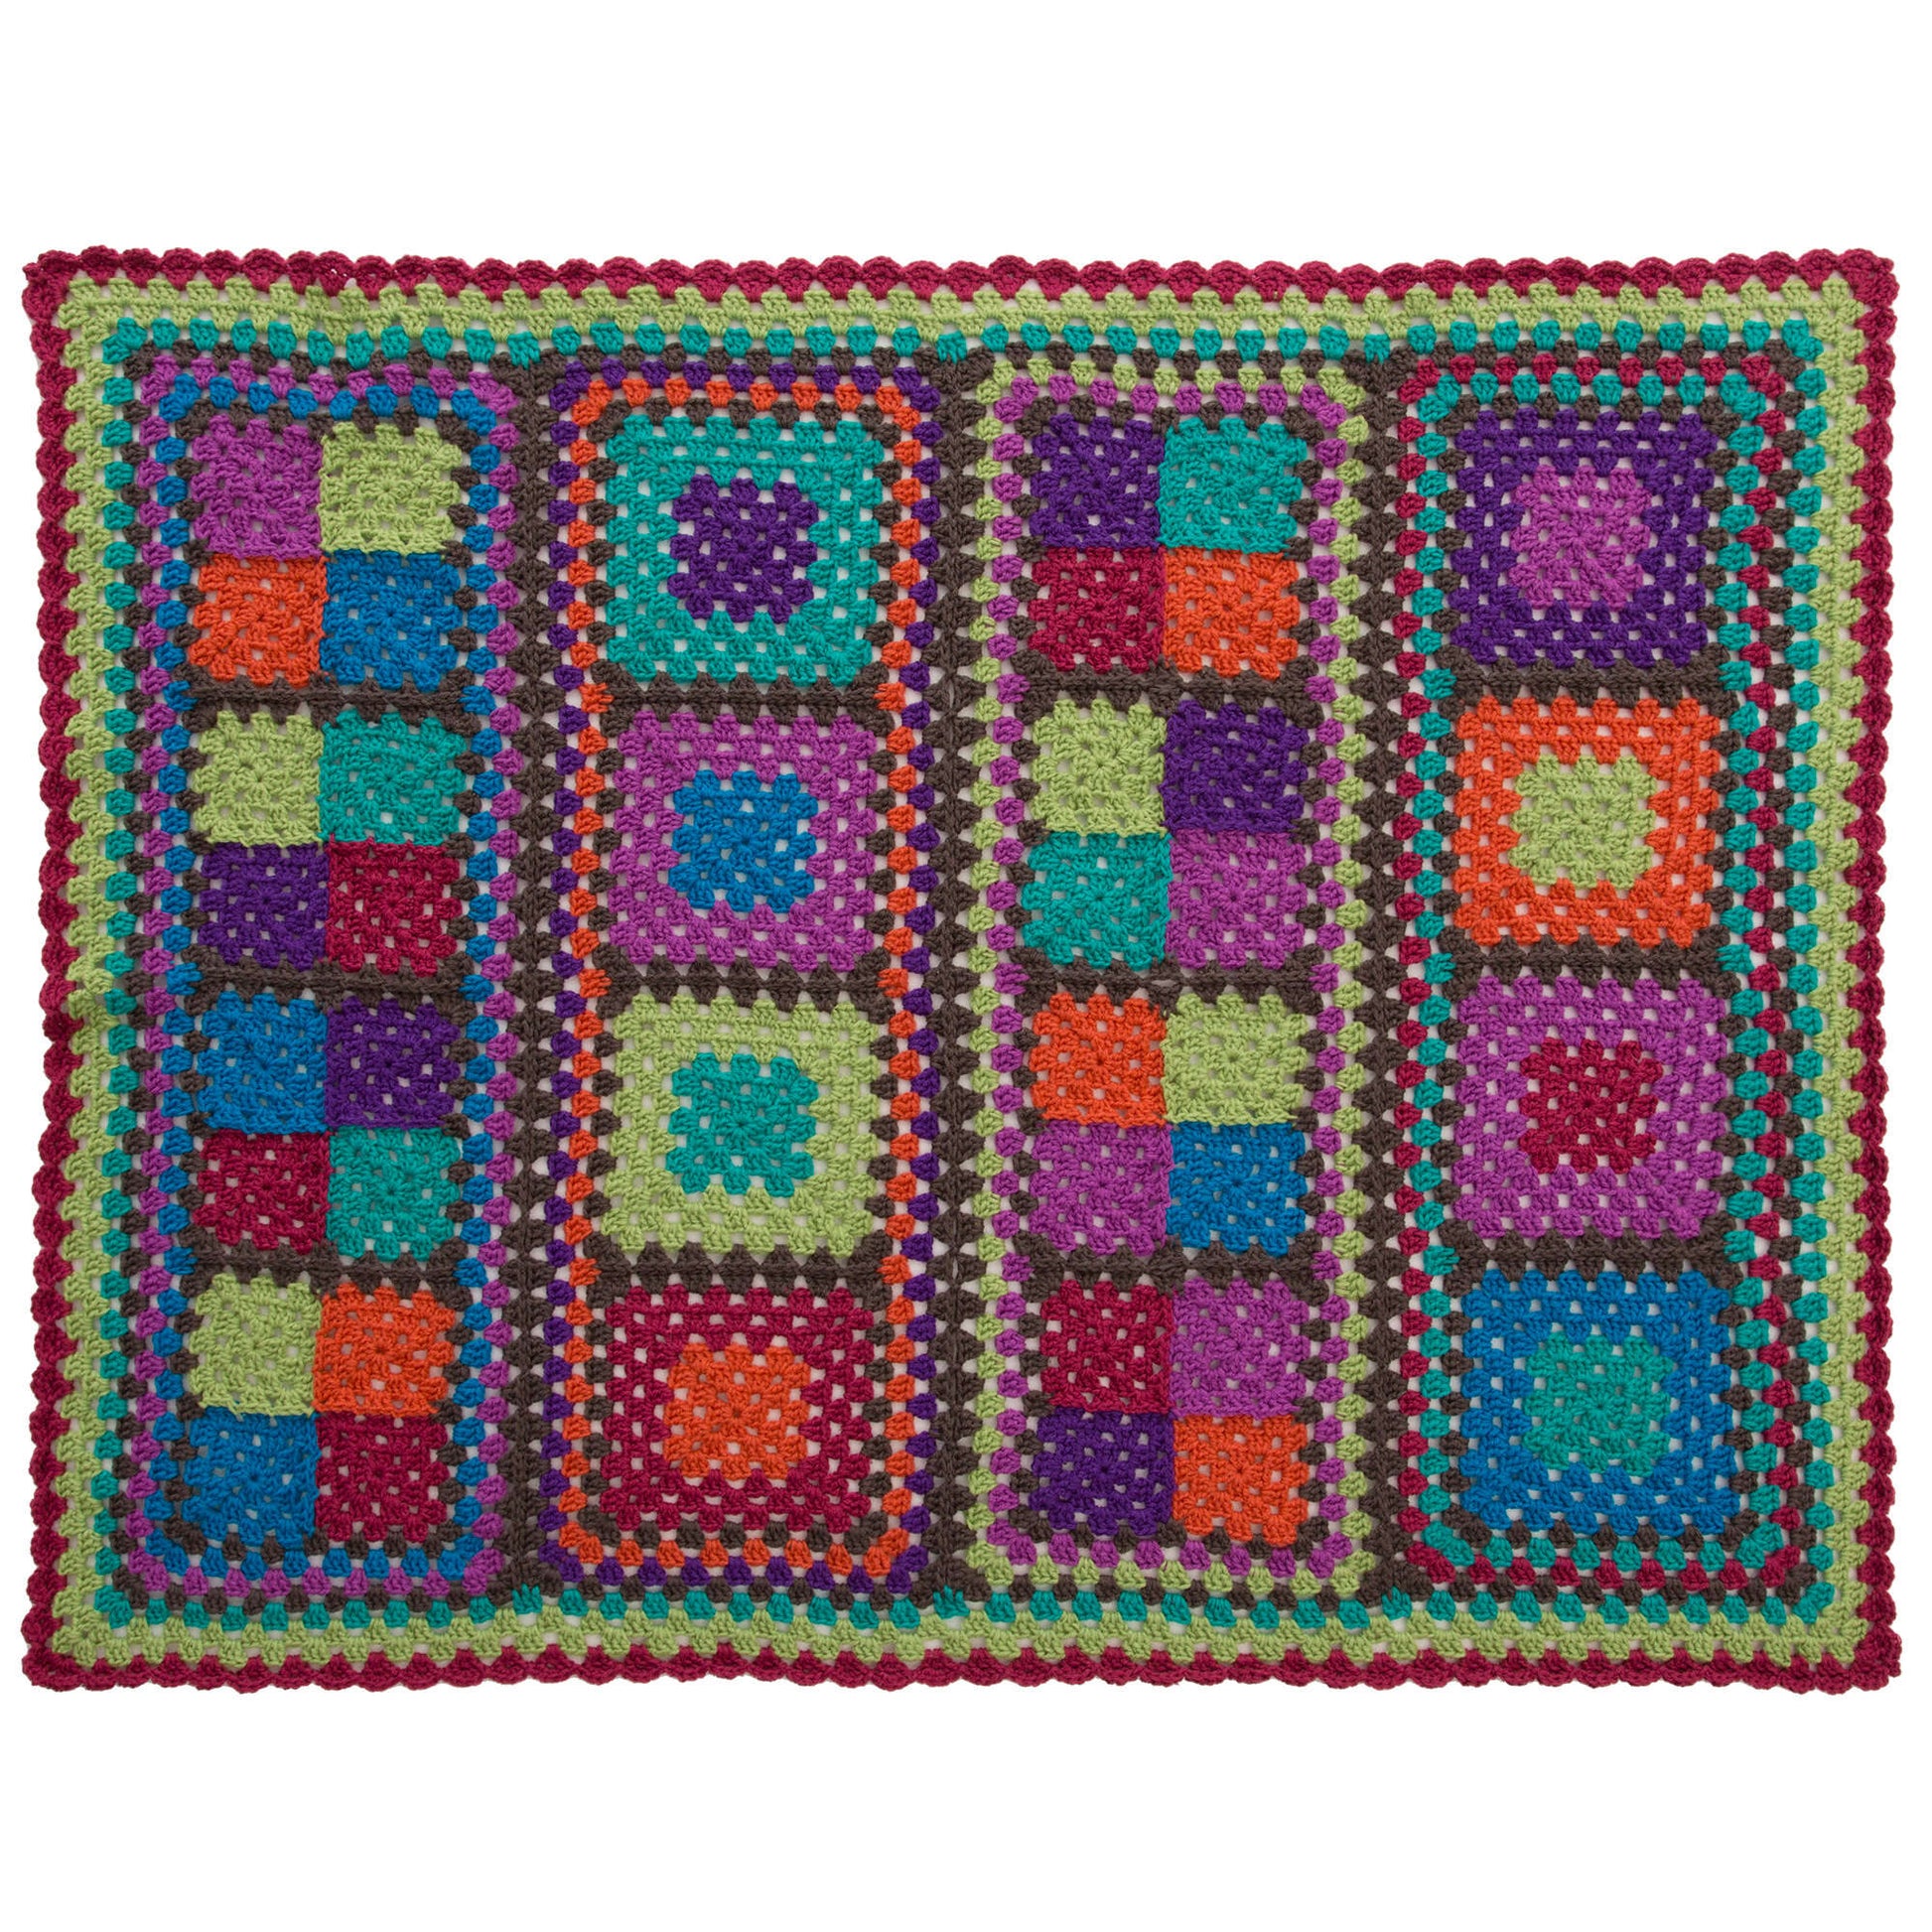 Free Red Heart Crochet Granny Re-mix Throw Pattern